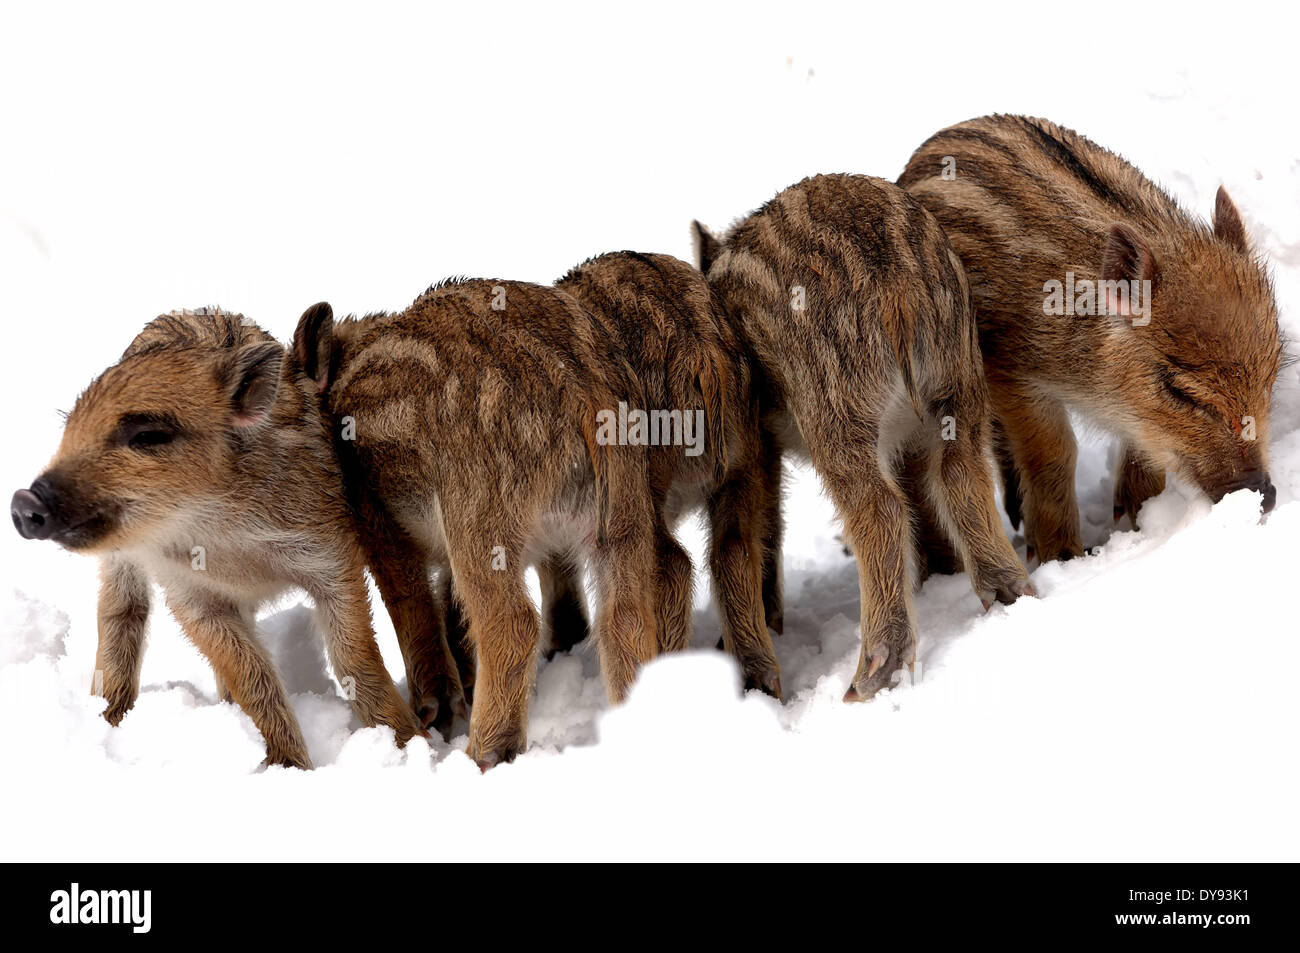 Wild boar Sus scrofa scrofa sow sows wild boars cloven-hoofed animal pigs pig vertebrates mammals winter snow cold young wild Stock Photo